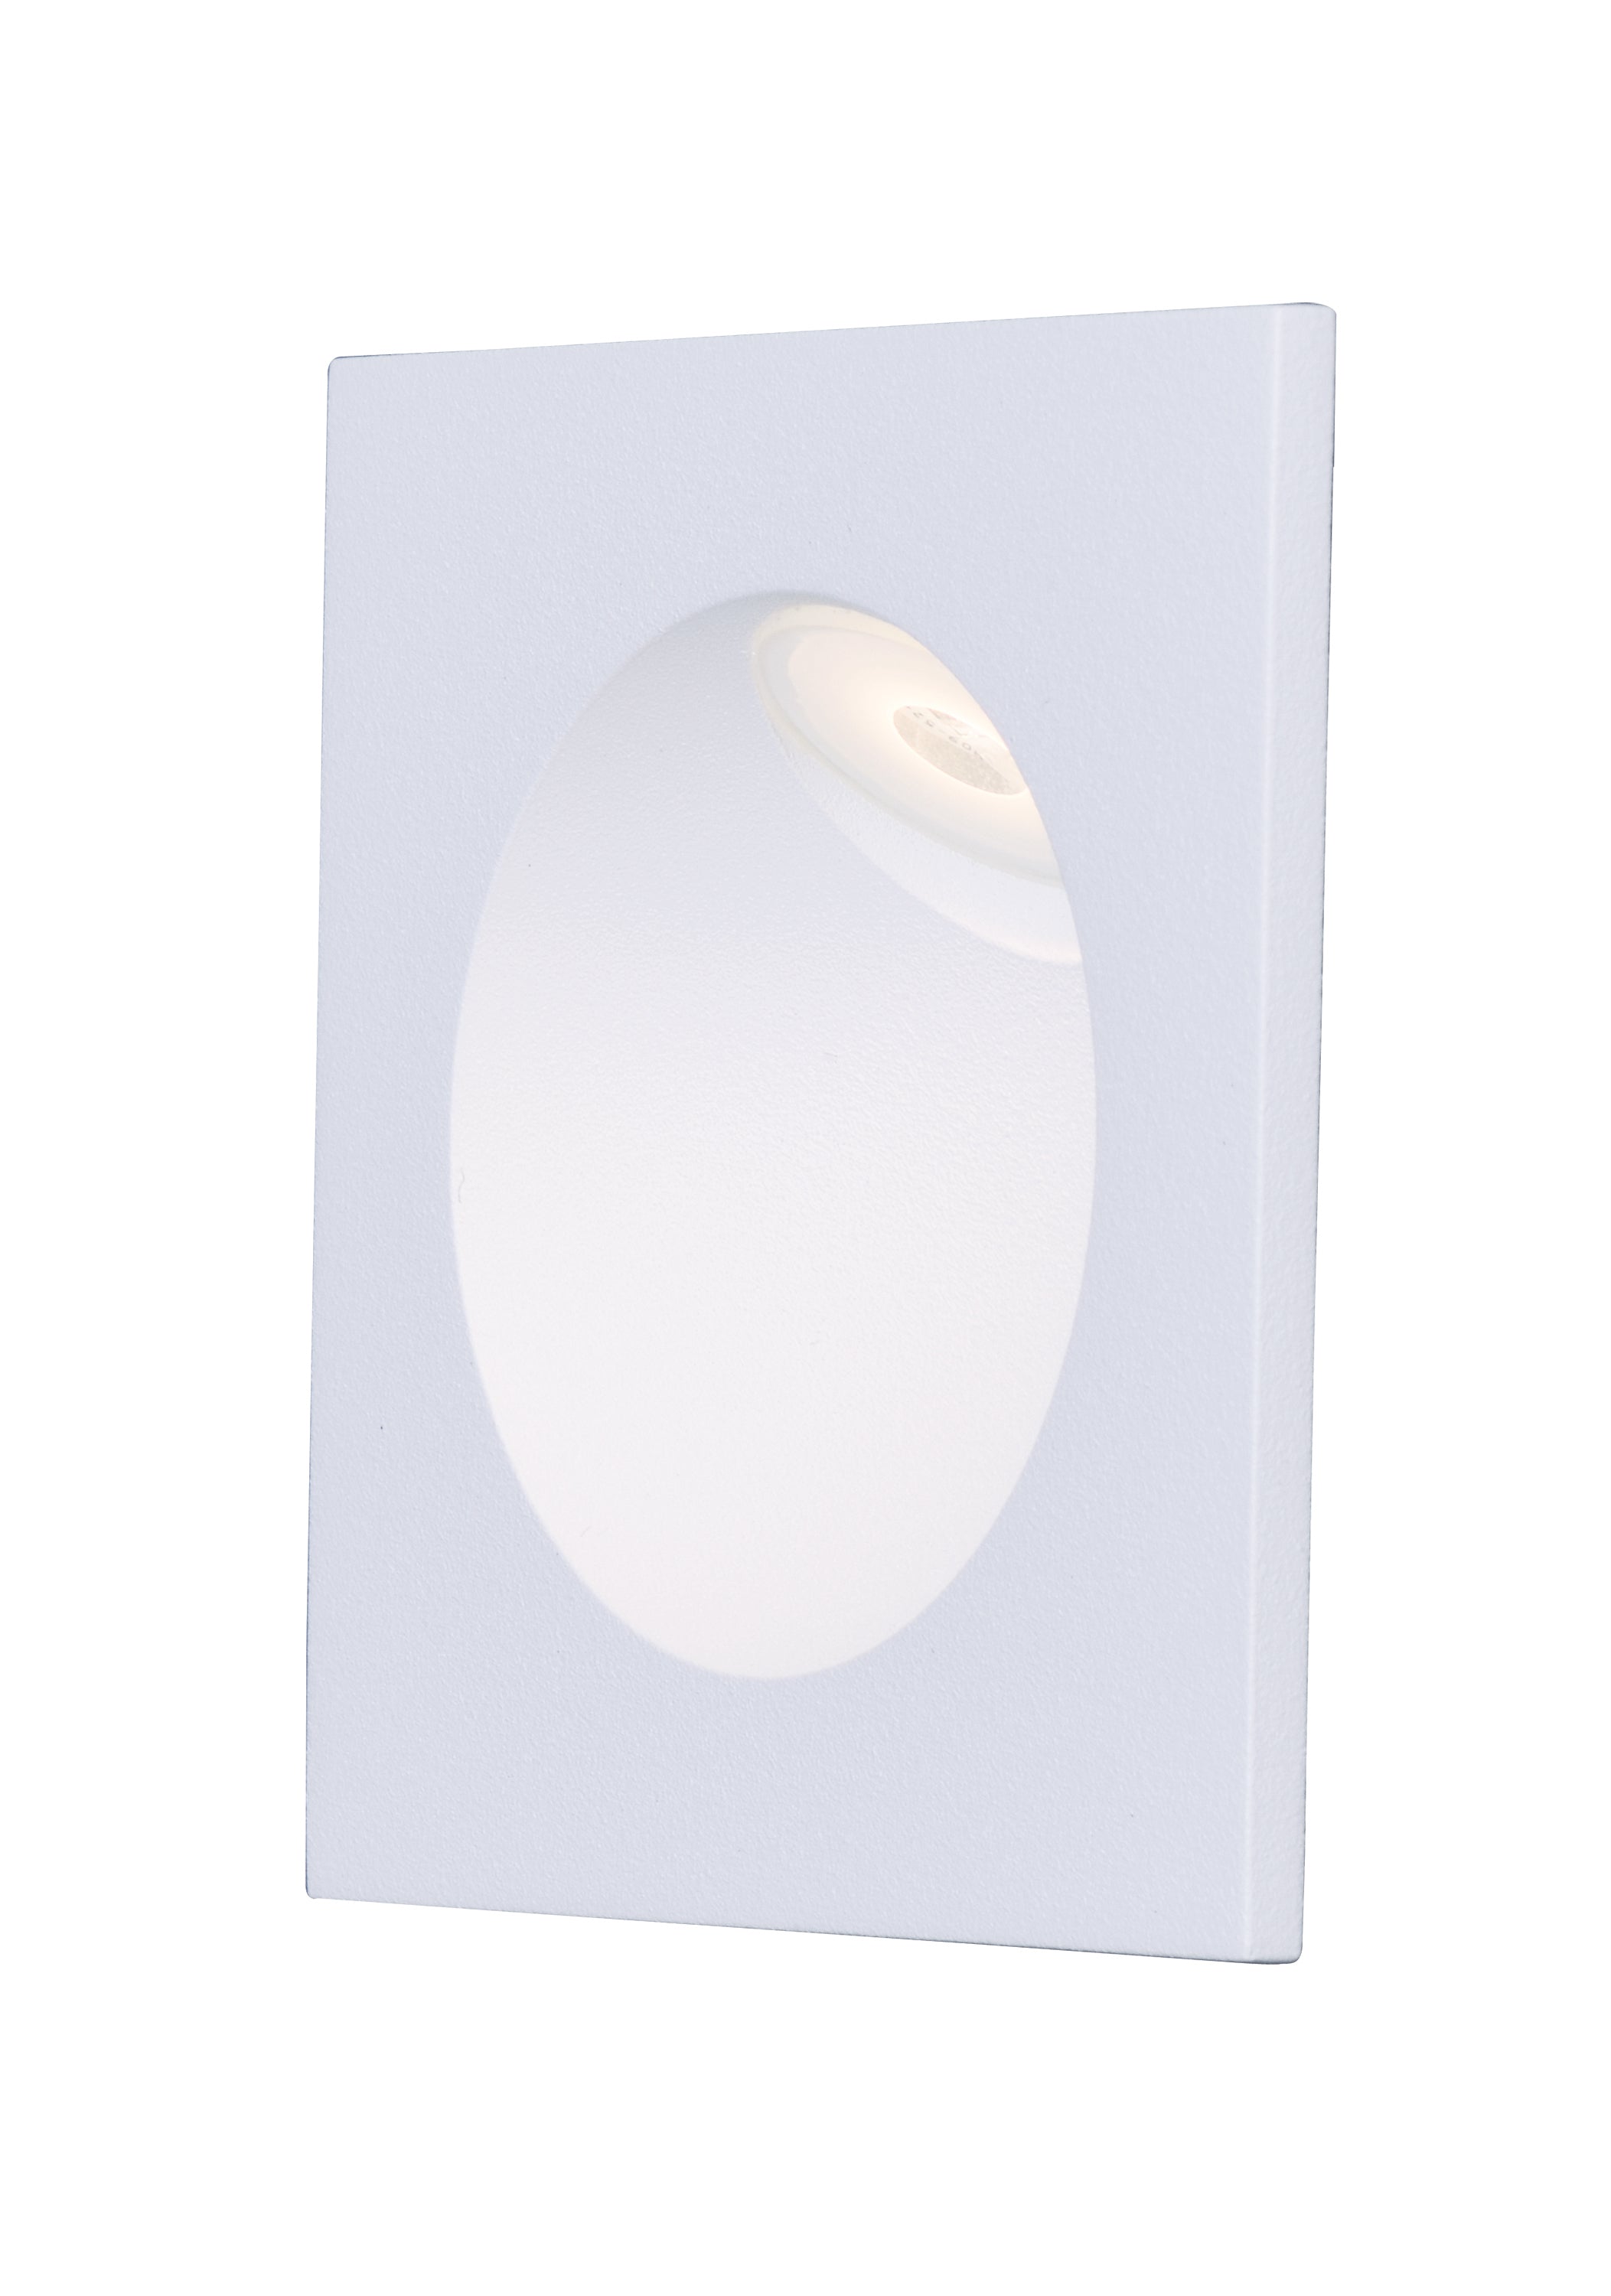 Alumilux Step Light-Outdoor Wall Mount Outdoor l Wall ET2 x3.25x3.25 White 